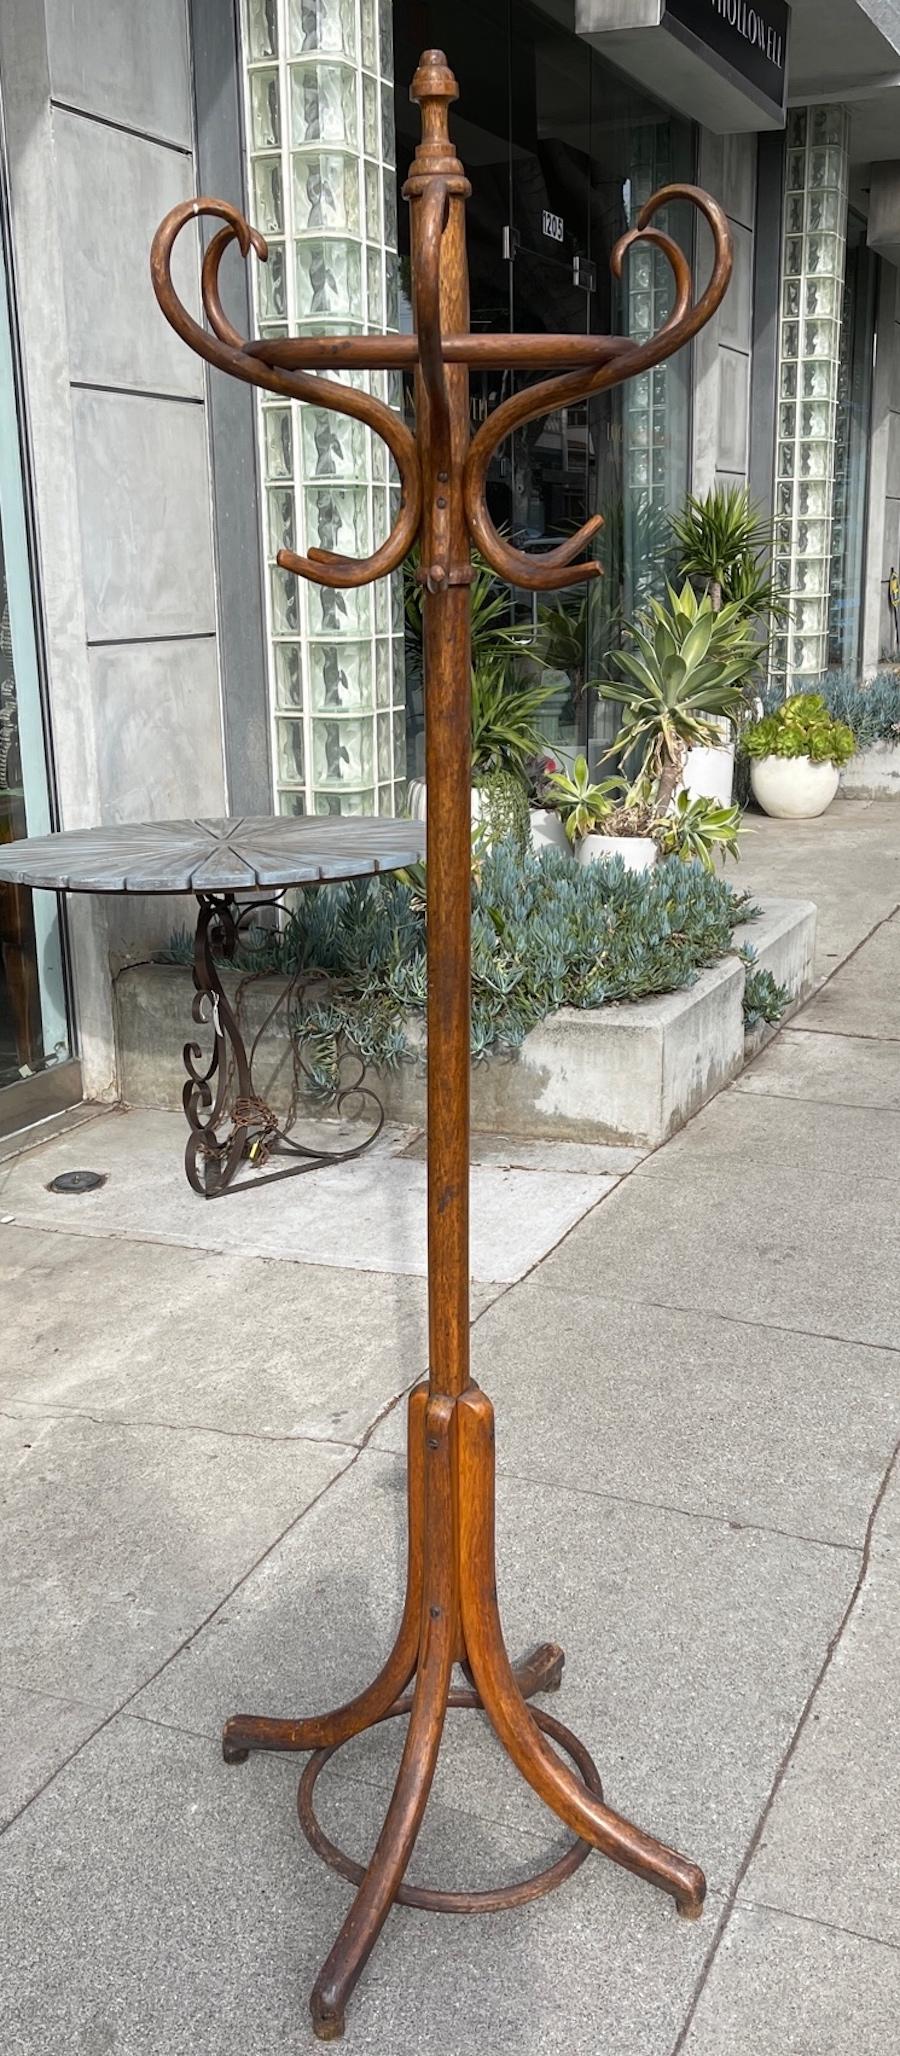 This is a beautiful original 19th century French Bistro coat stand. It is in remarkably good condition considering its age.